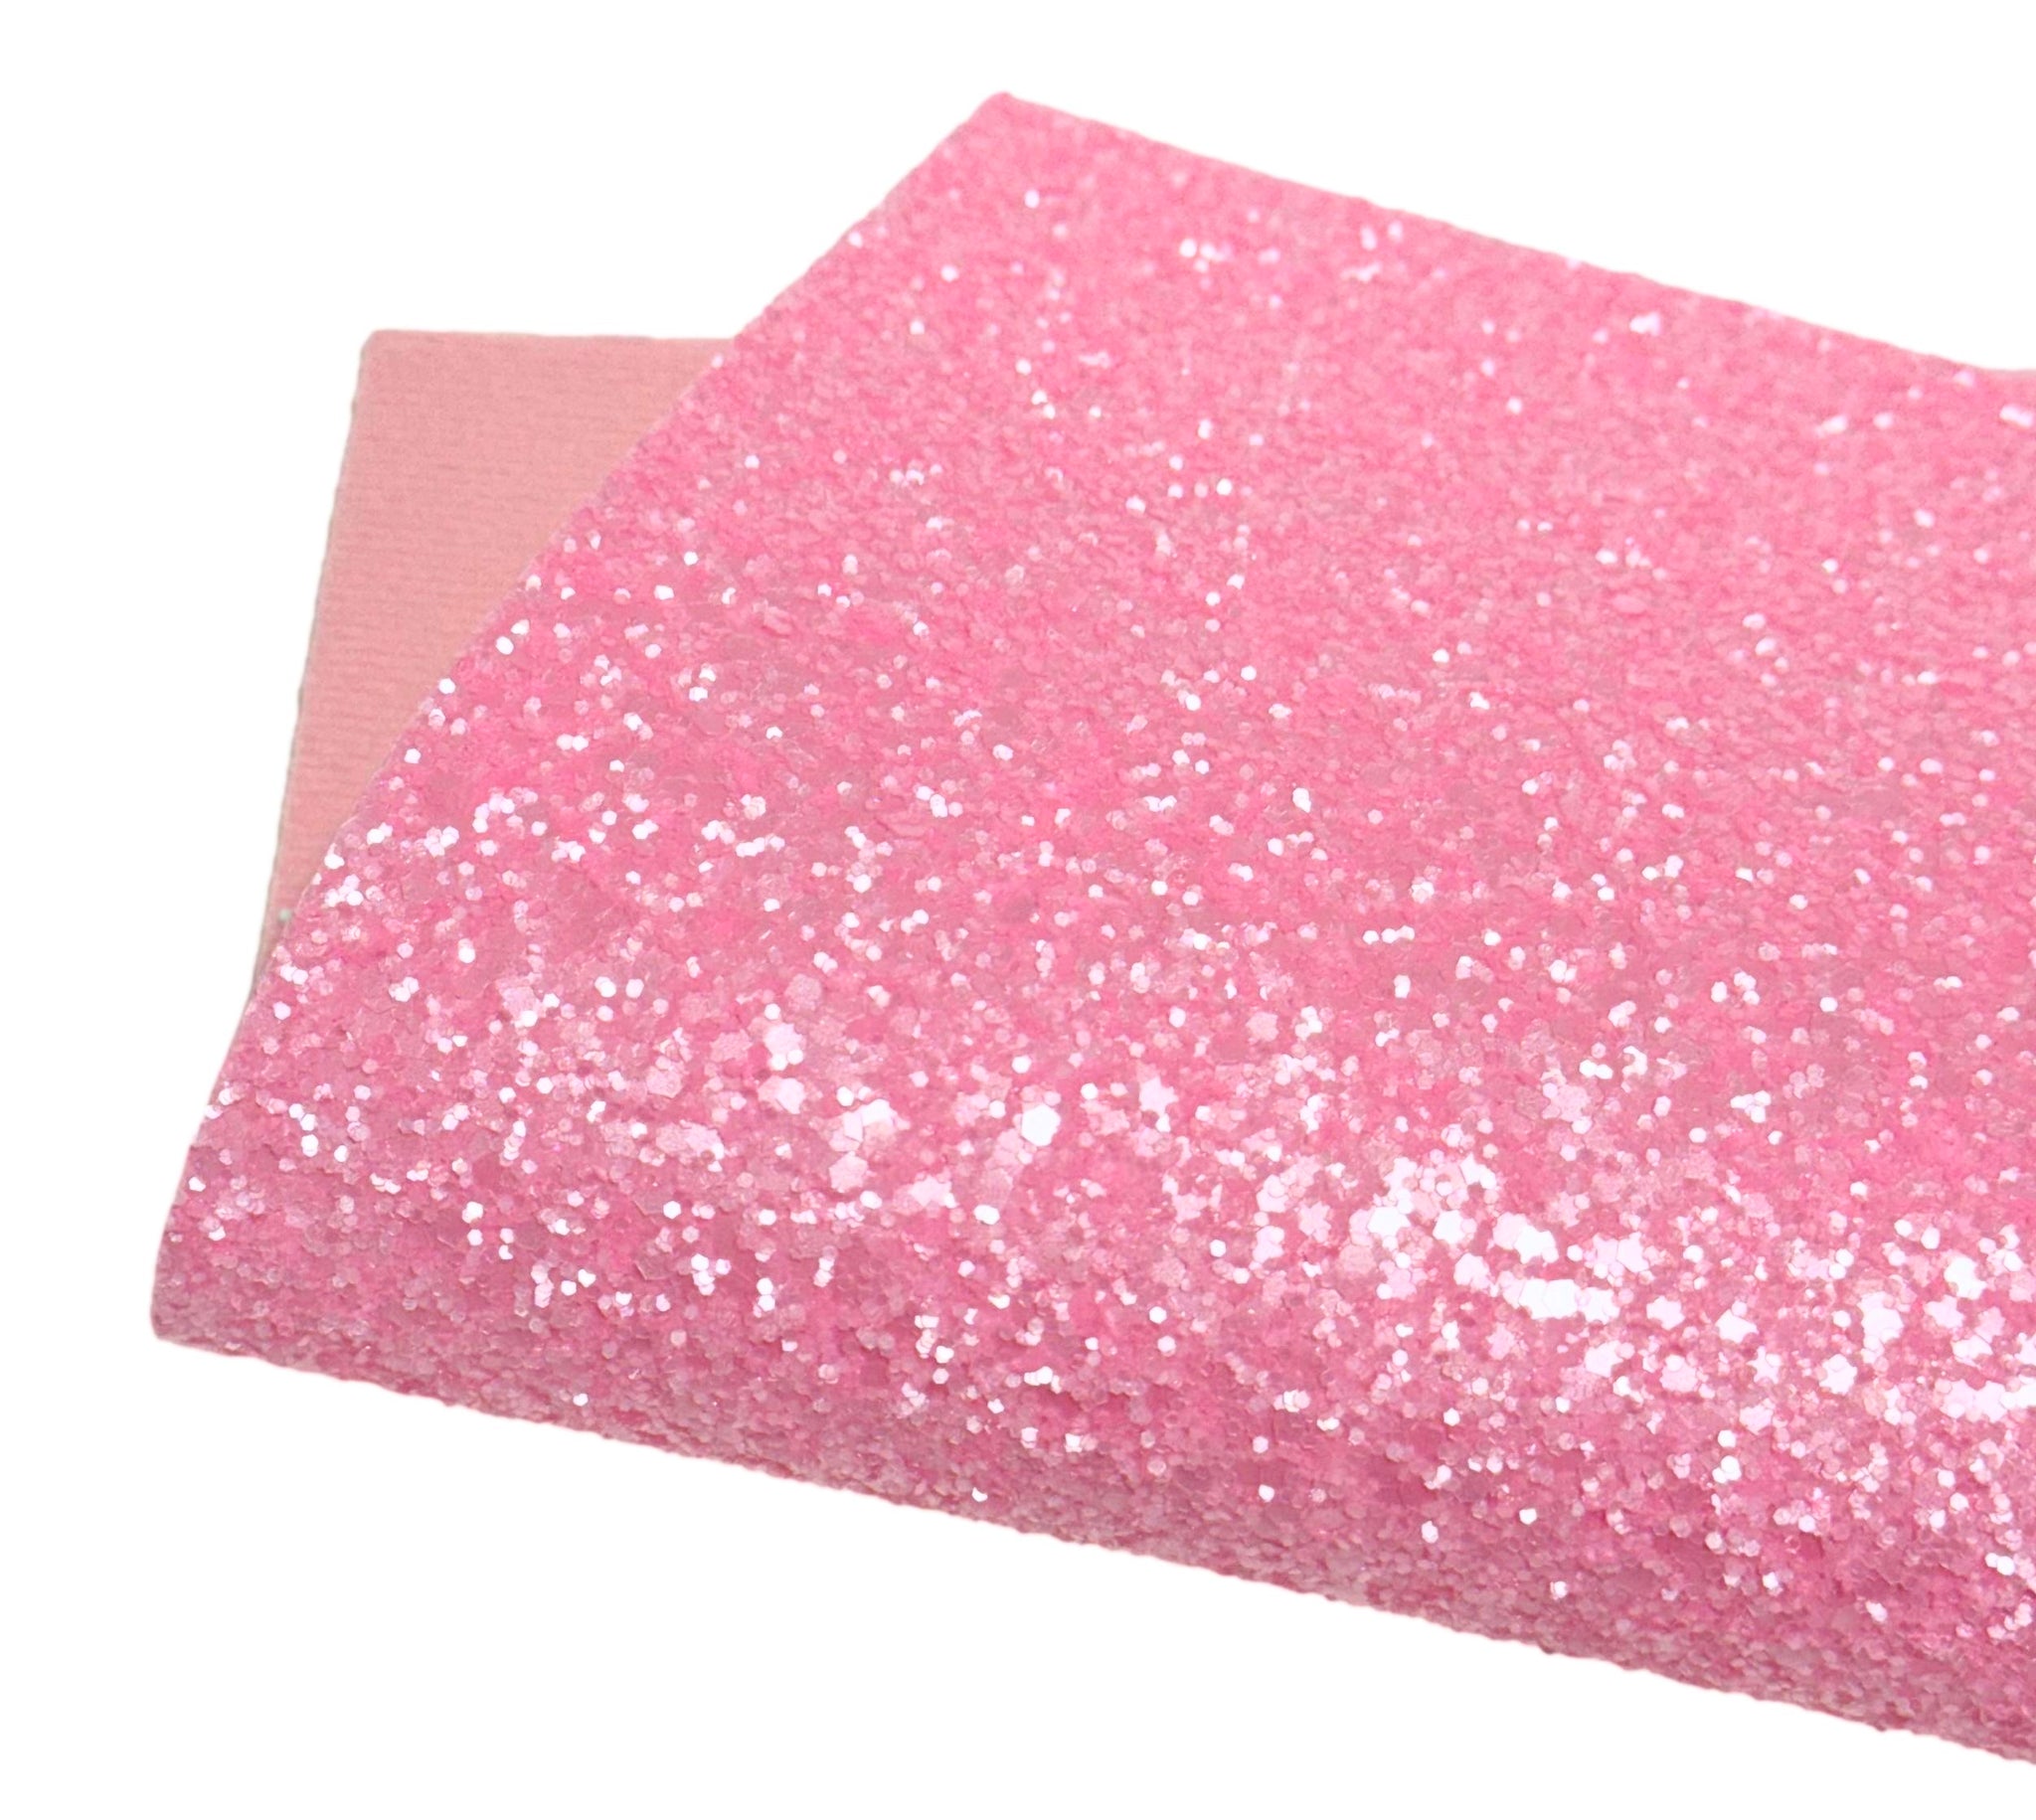 NEW! Pink Ice Chunky Glitter w/ Pink Felt Backing-READY TO SHIP